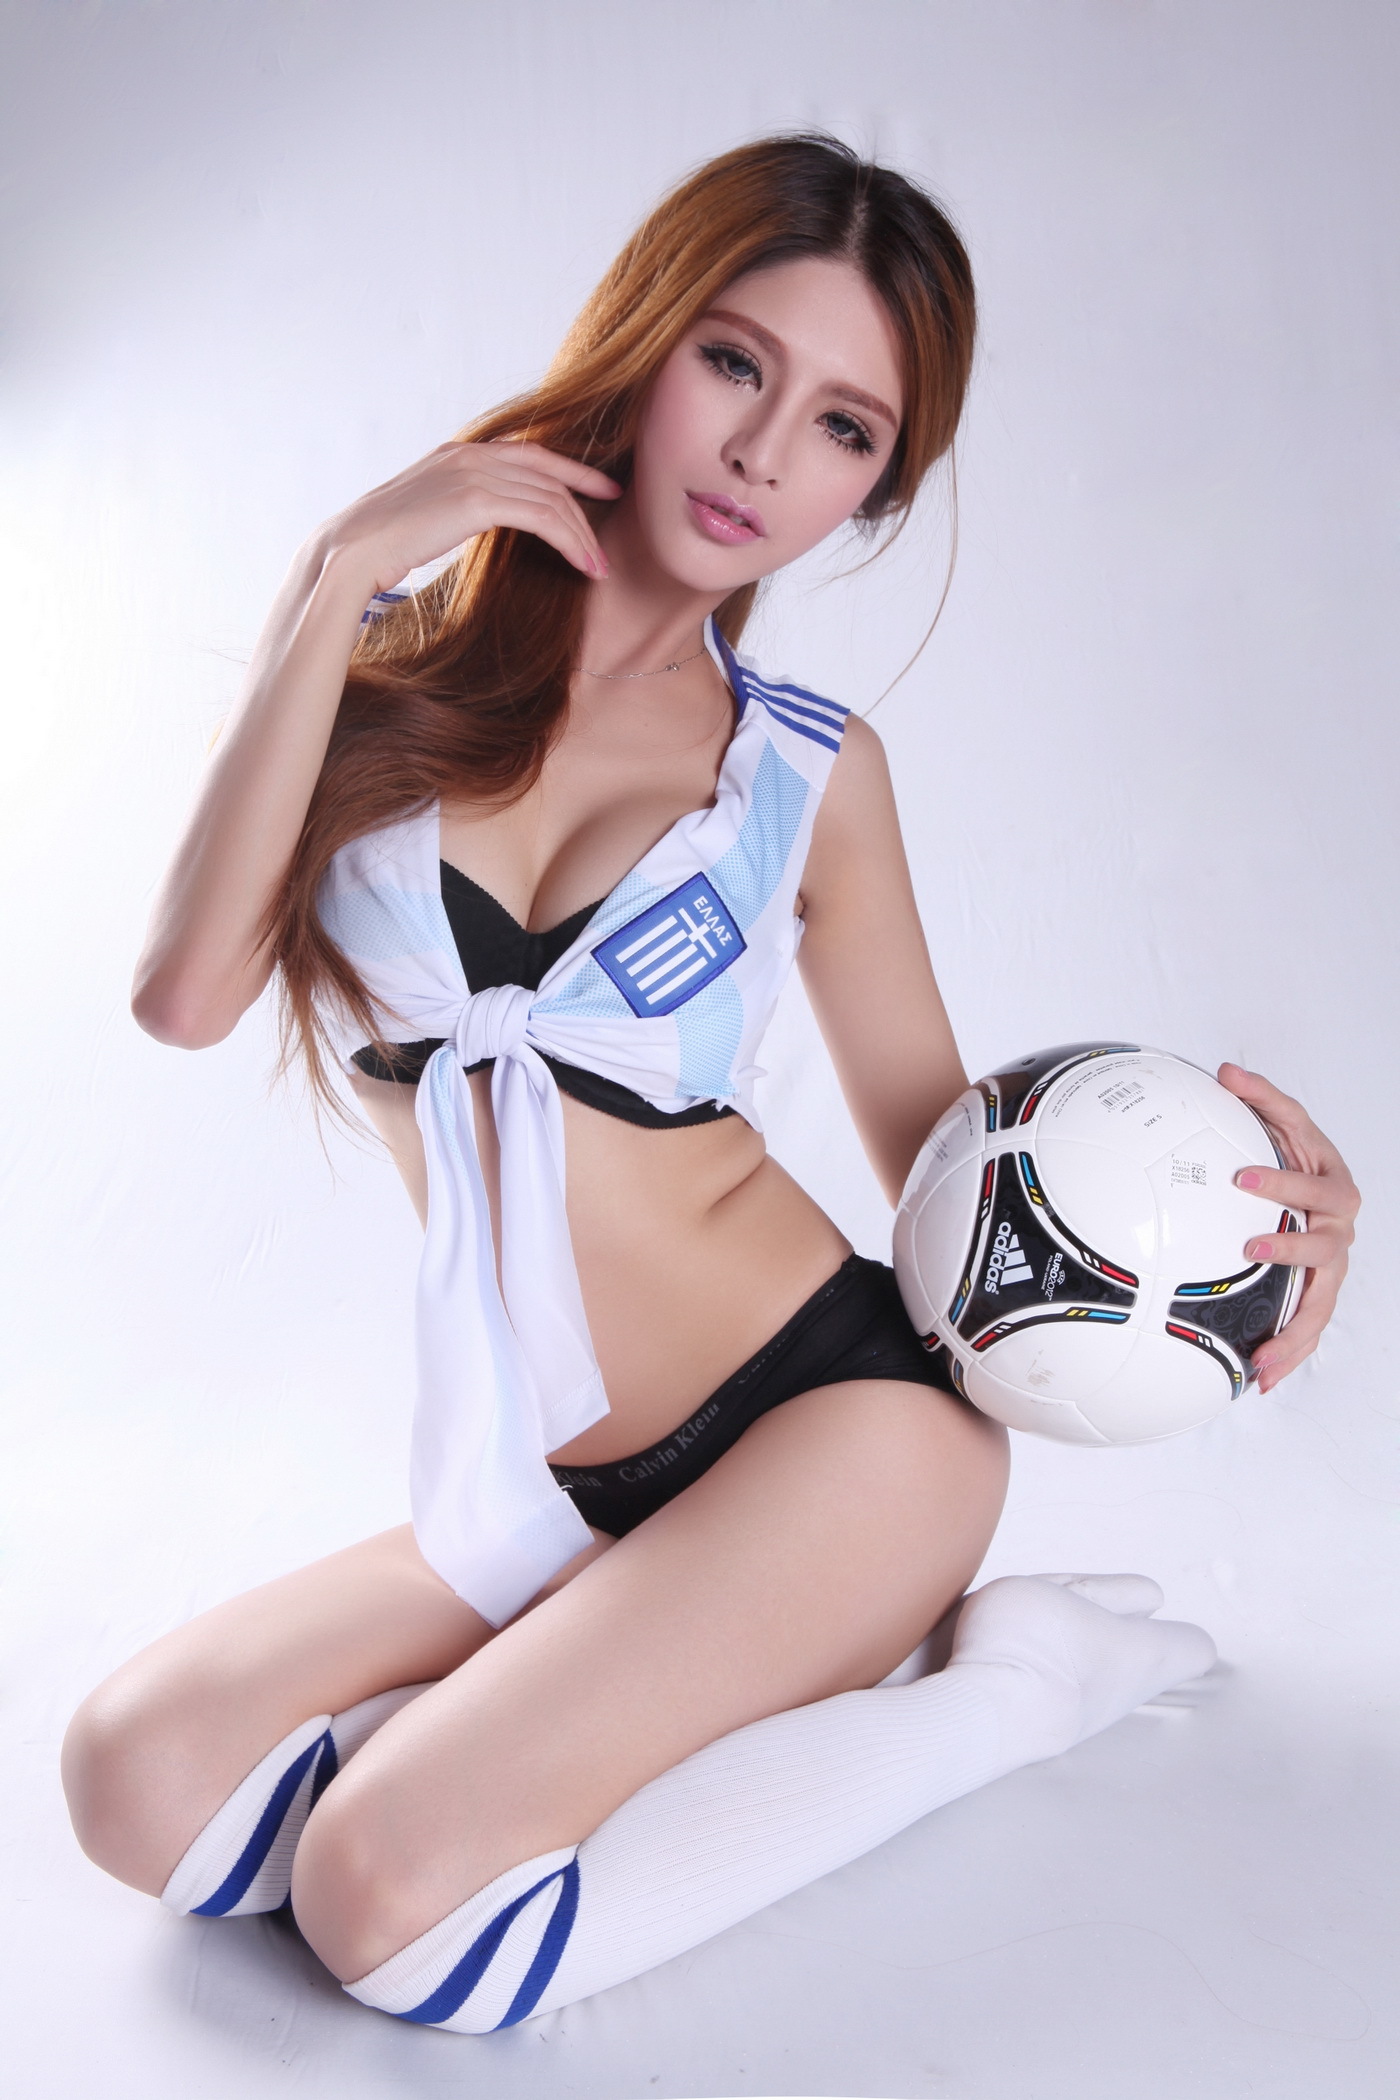 Football baby - Lin xiaonuo, delicate and perfect breast, super temptation to burst bra